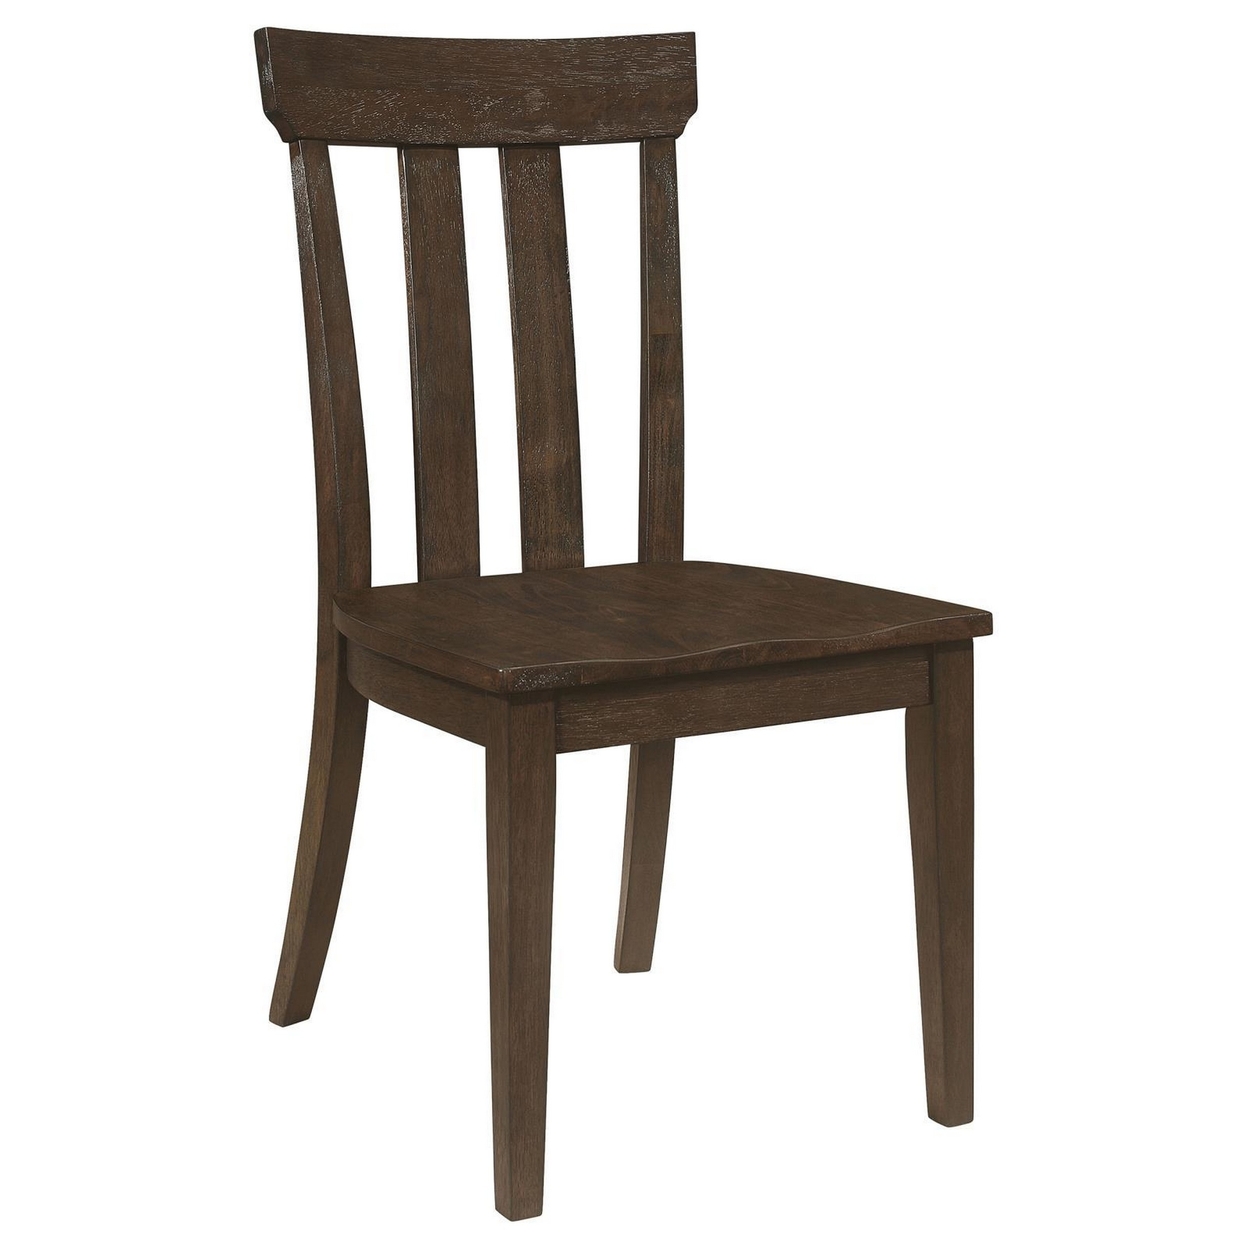 Riza 23 Inch Dining Chair, Set Of 2, Wire Brushed, Slatted Back, Rich Brown -Saltoro Sherpi